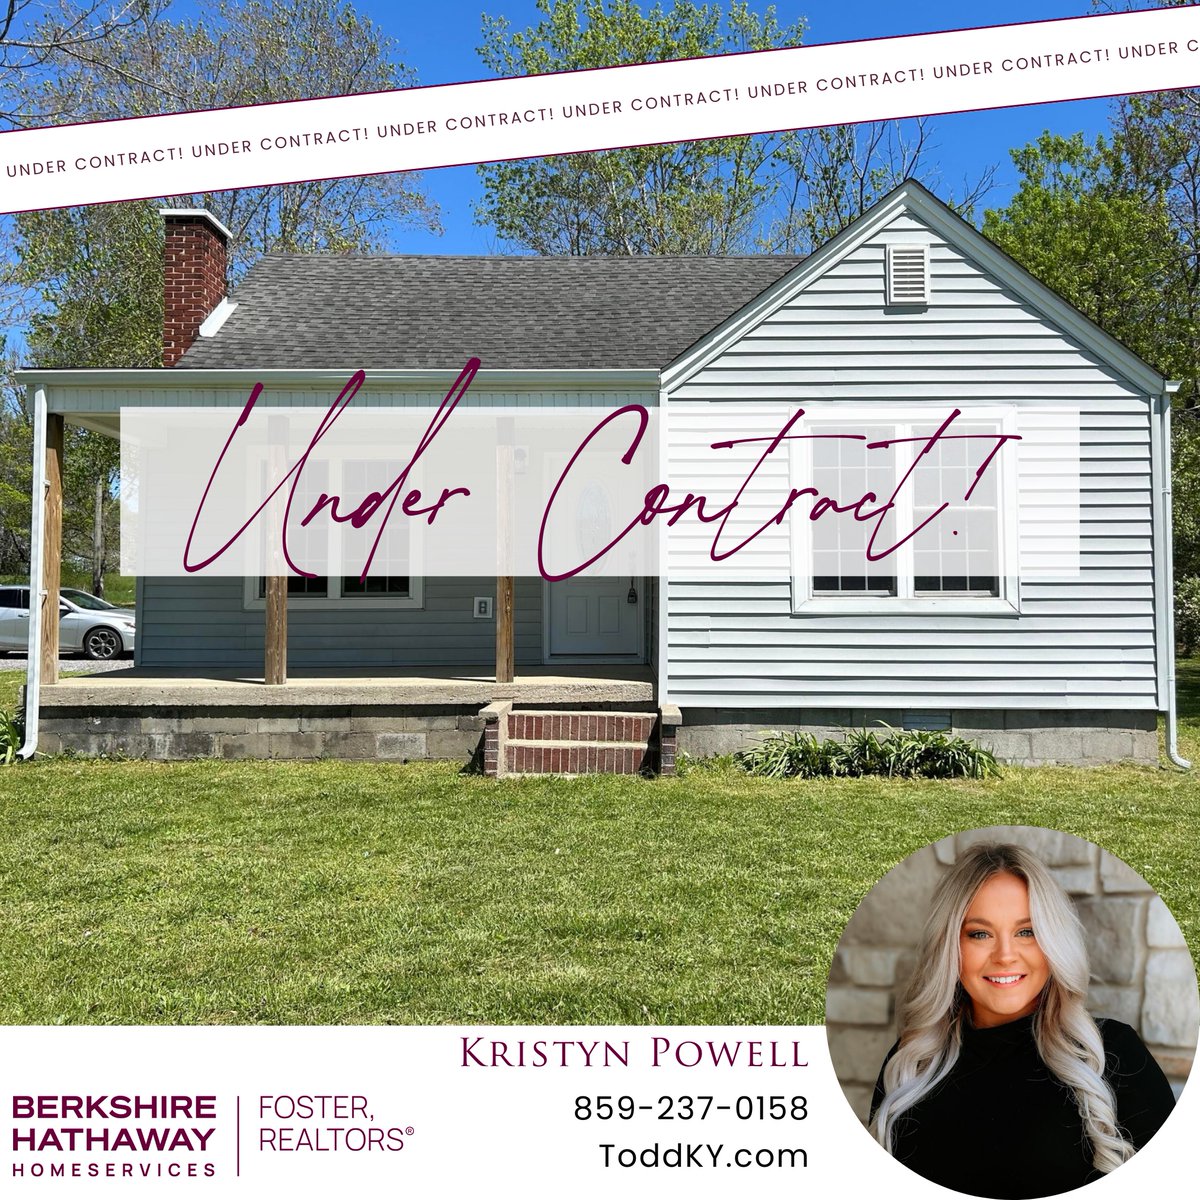 🎉 Congratulations to Kristyn Powell for successfully getting her buyers under contract! 🏡🎊 Way to go, Kristyn! Your dedication and hard work truly shine 🌟

#RealEstateSuccess #UnderContract #BHHSFosterRealtors #ToddAndCompany